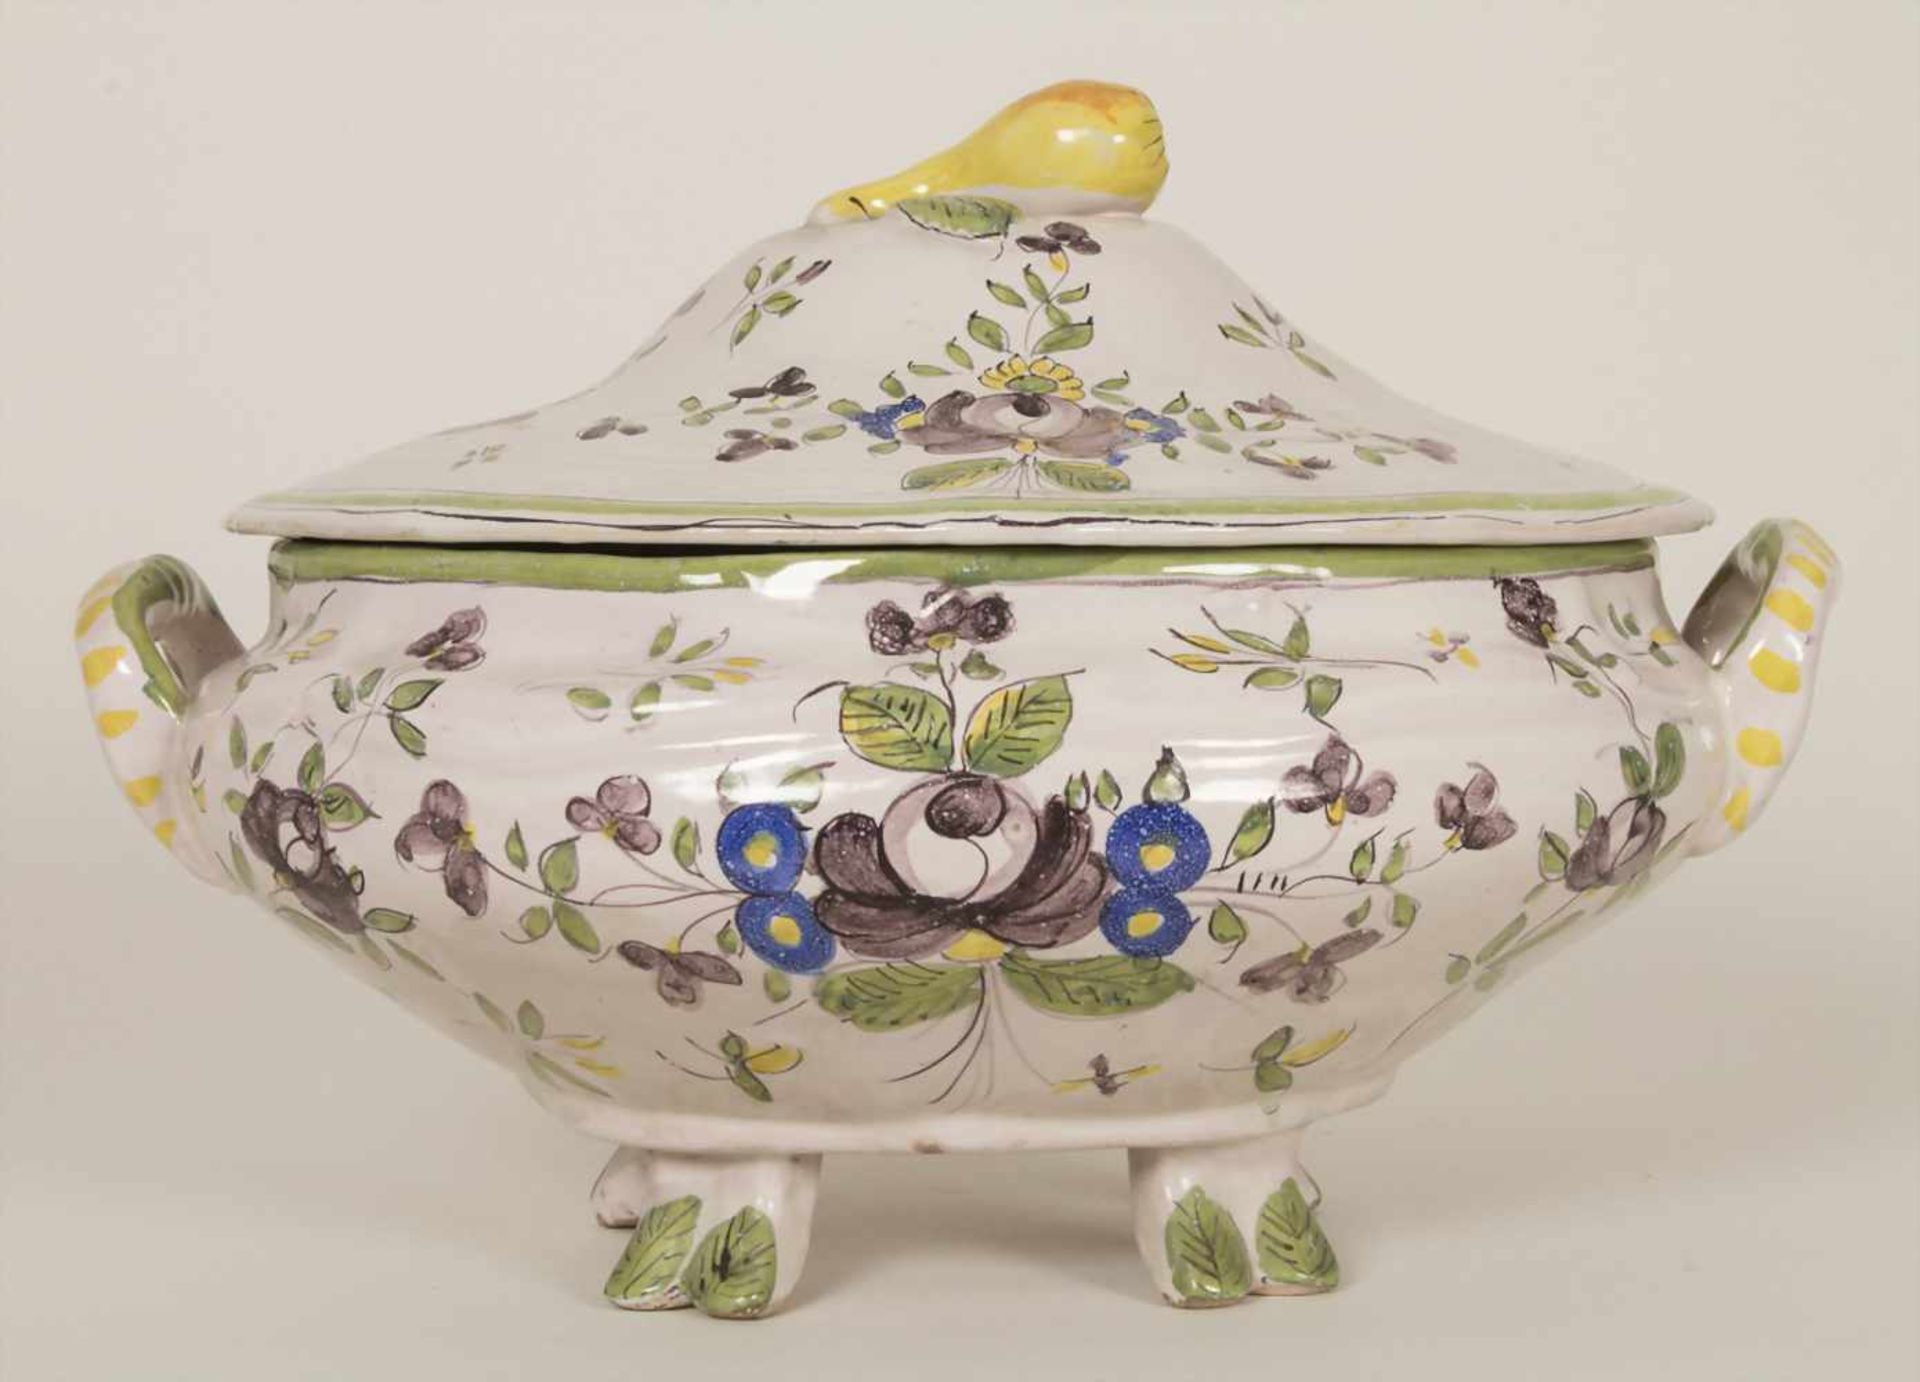 Fayence-Deckelterinne / A faience covered tureen, 18./19. Jh.Material: Keramik, floral polychrom